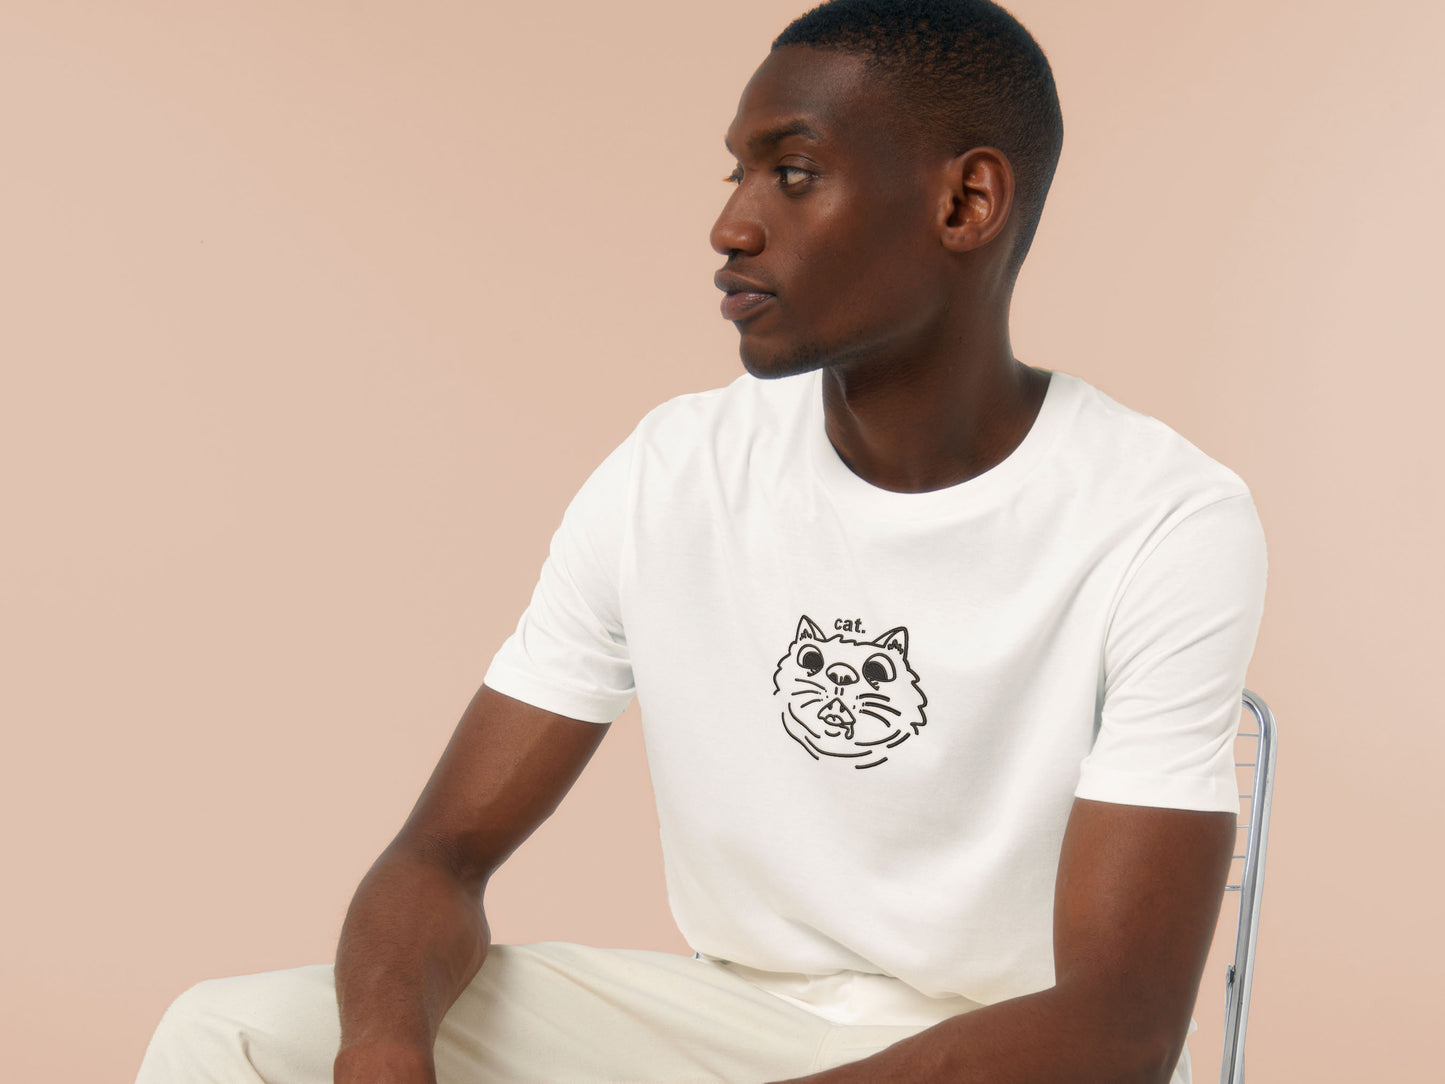 Man wearing a short sleeved white t-shirt with an Embroidered cat design